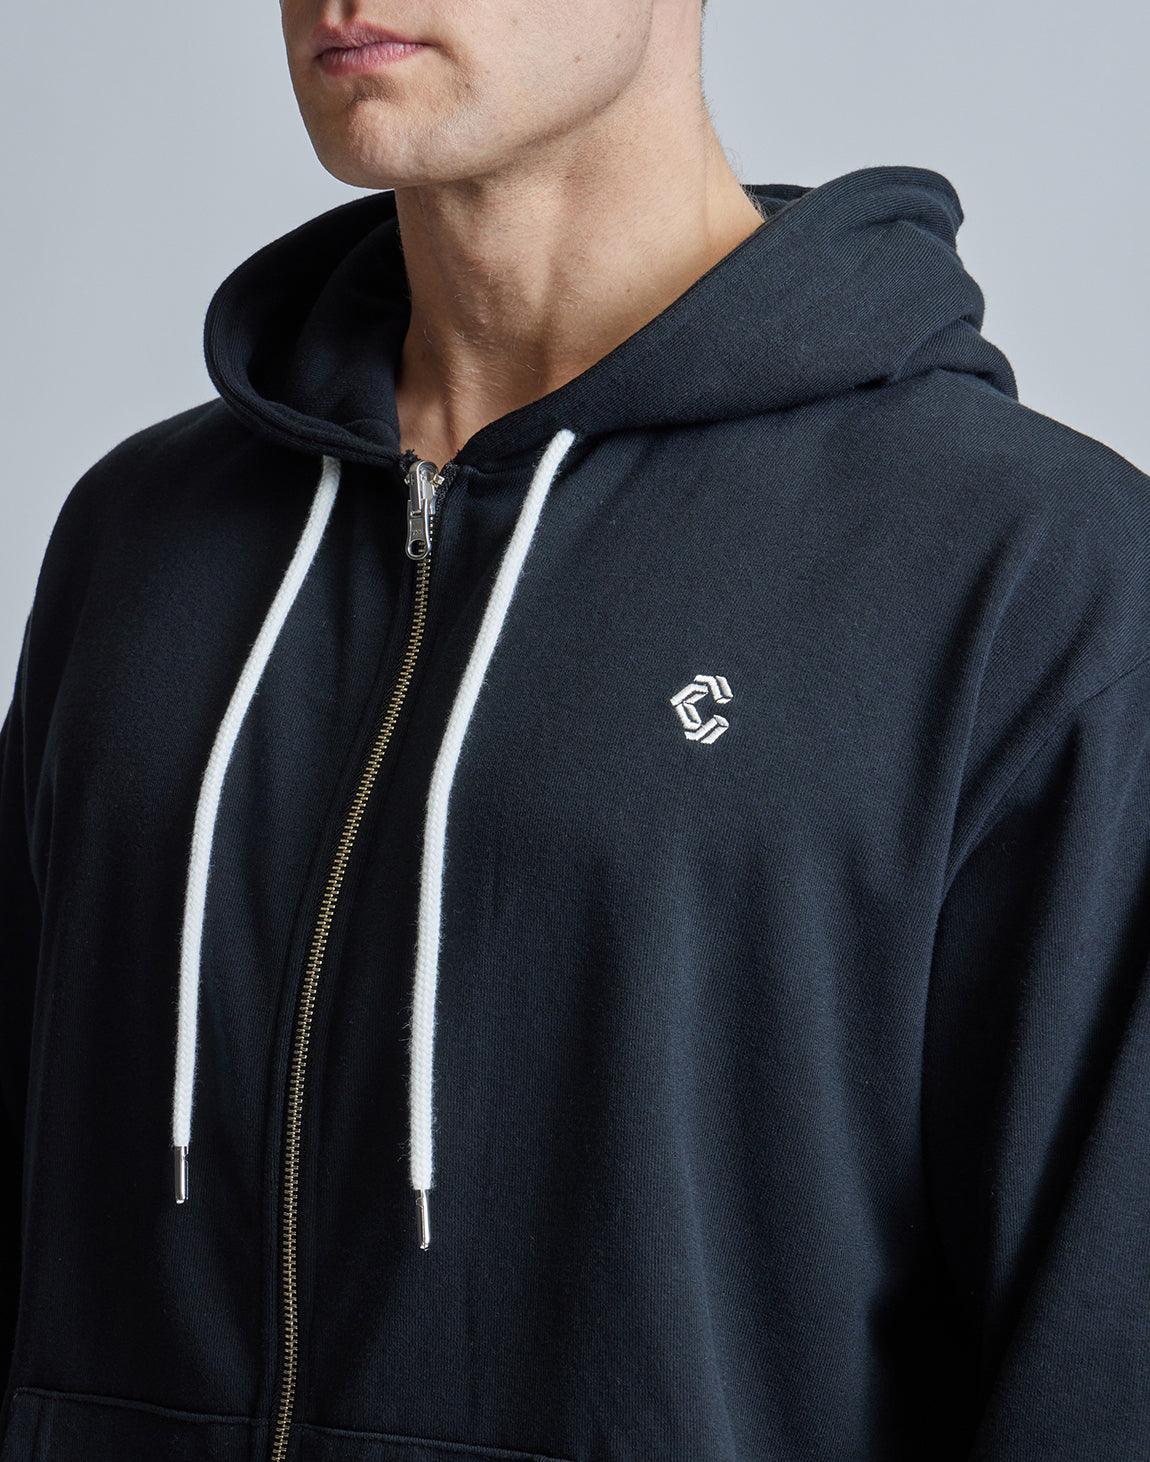 CRONOS ROOM LOGO EMBROIDERY HOODIE – クロノス CRONOS Official Store